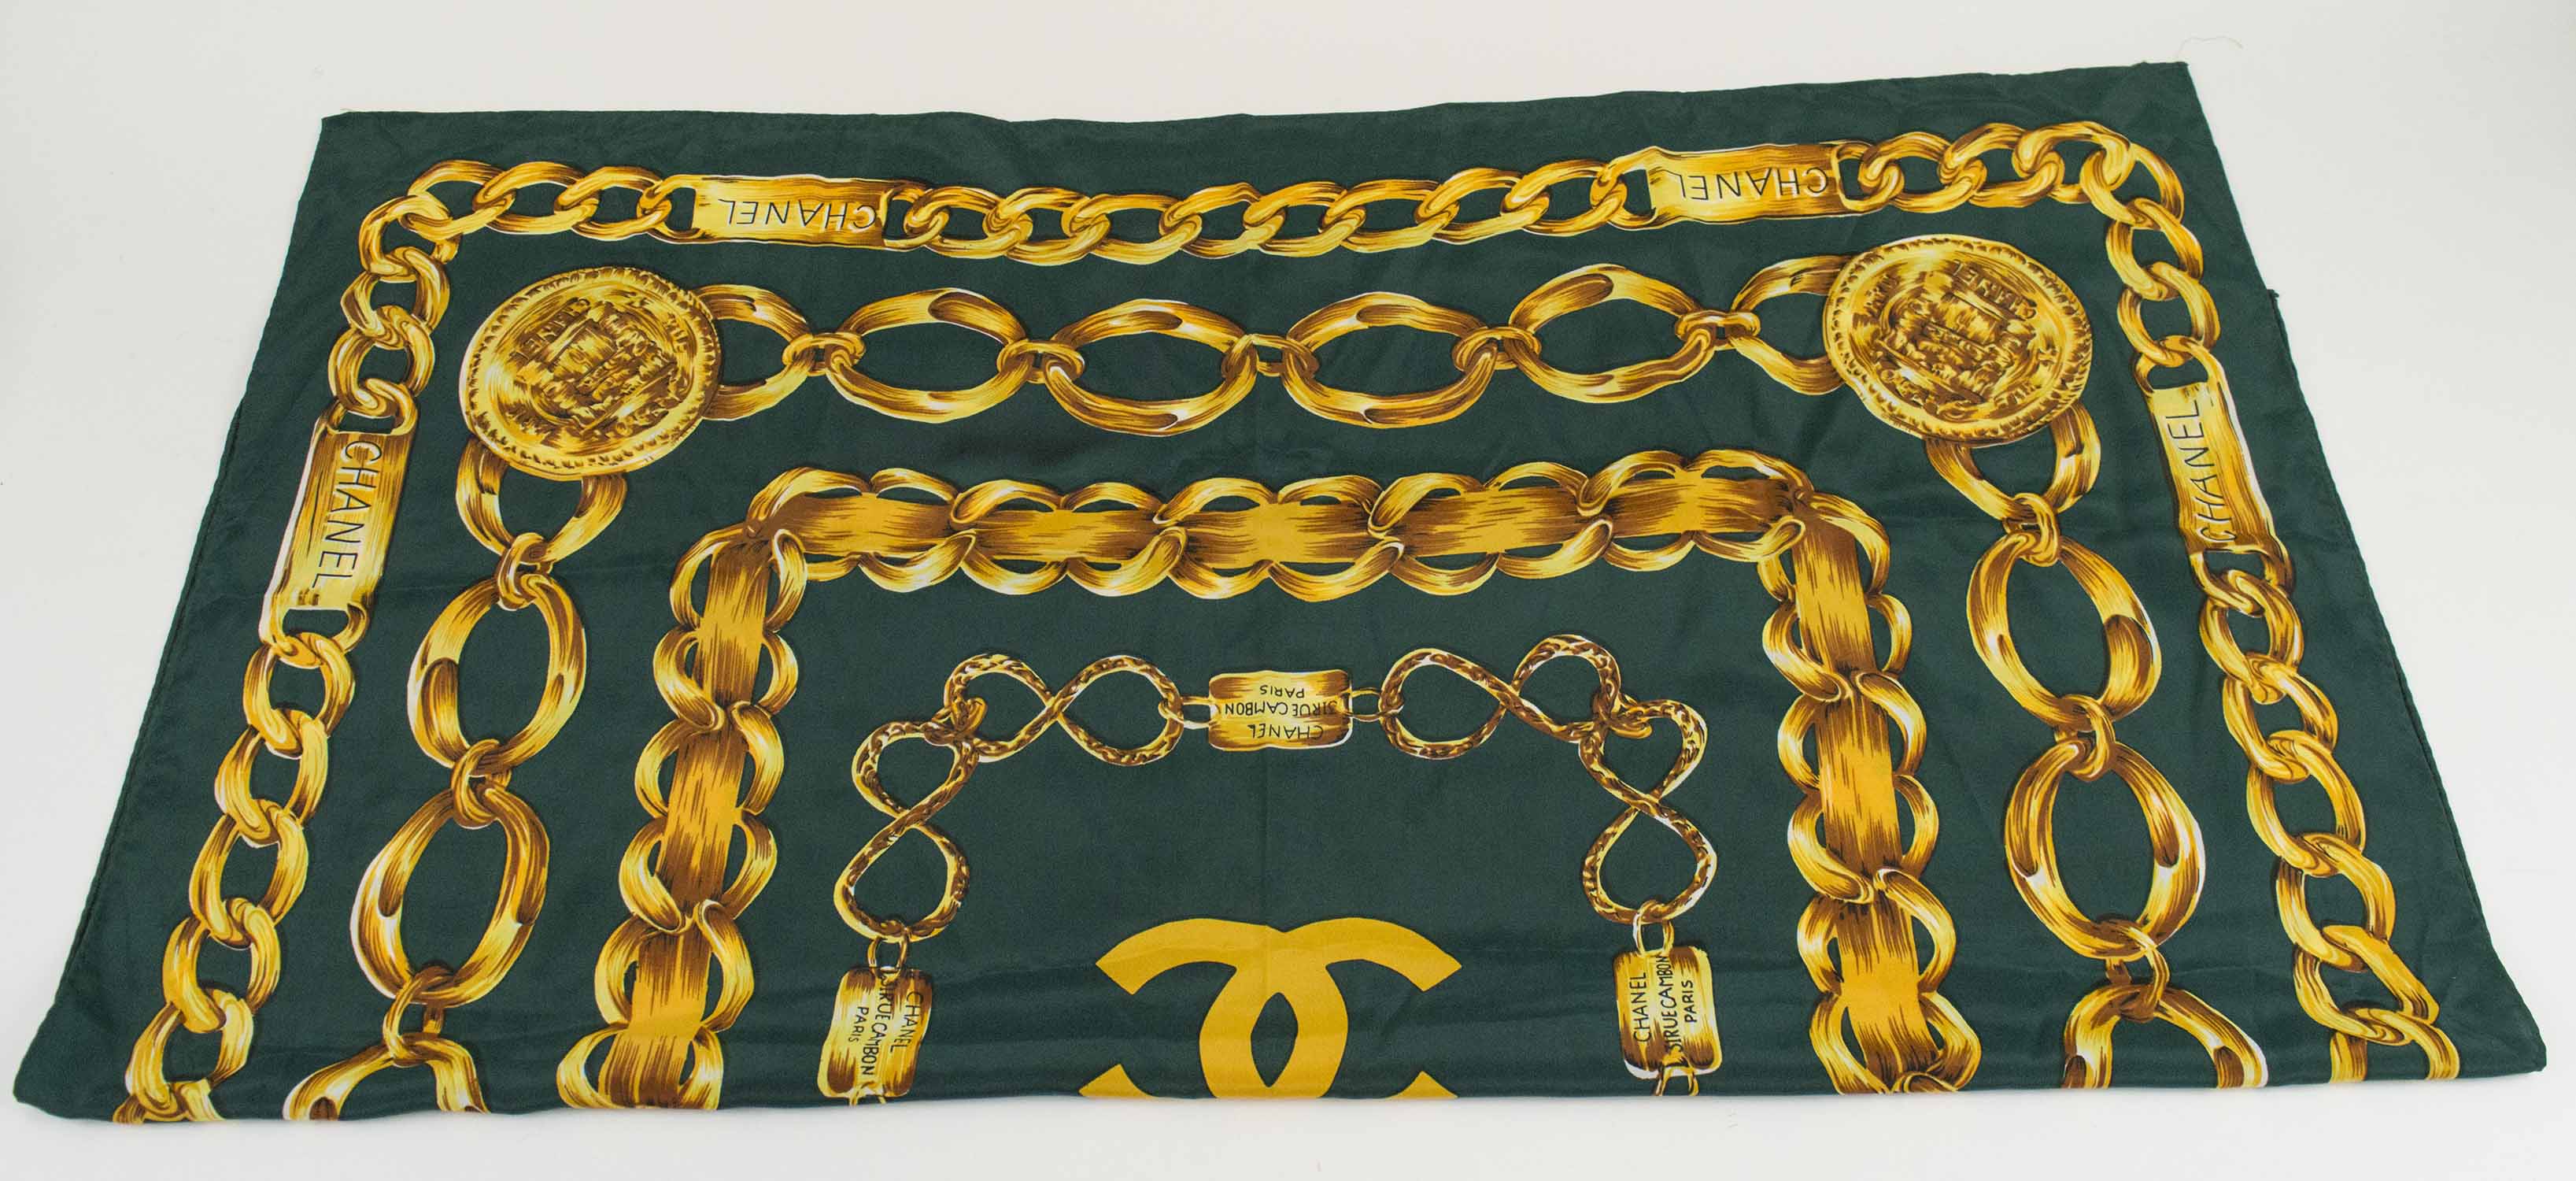 CHANEL RUE CAMBON VINTAGE SCARF, green with golden chain links pattern,  circa 1990s, silk, 86cm x 86cm.